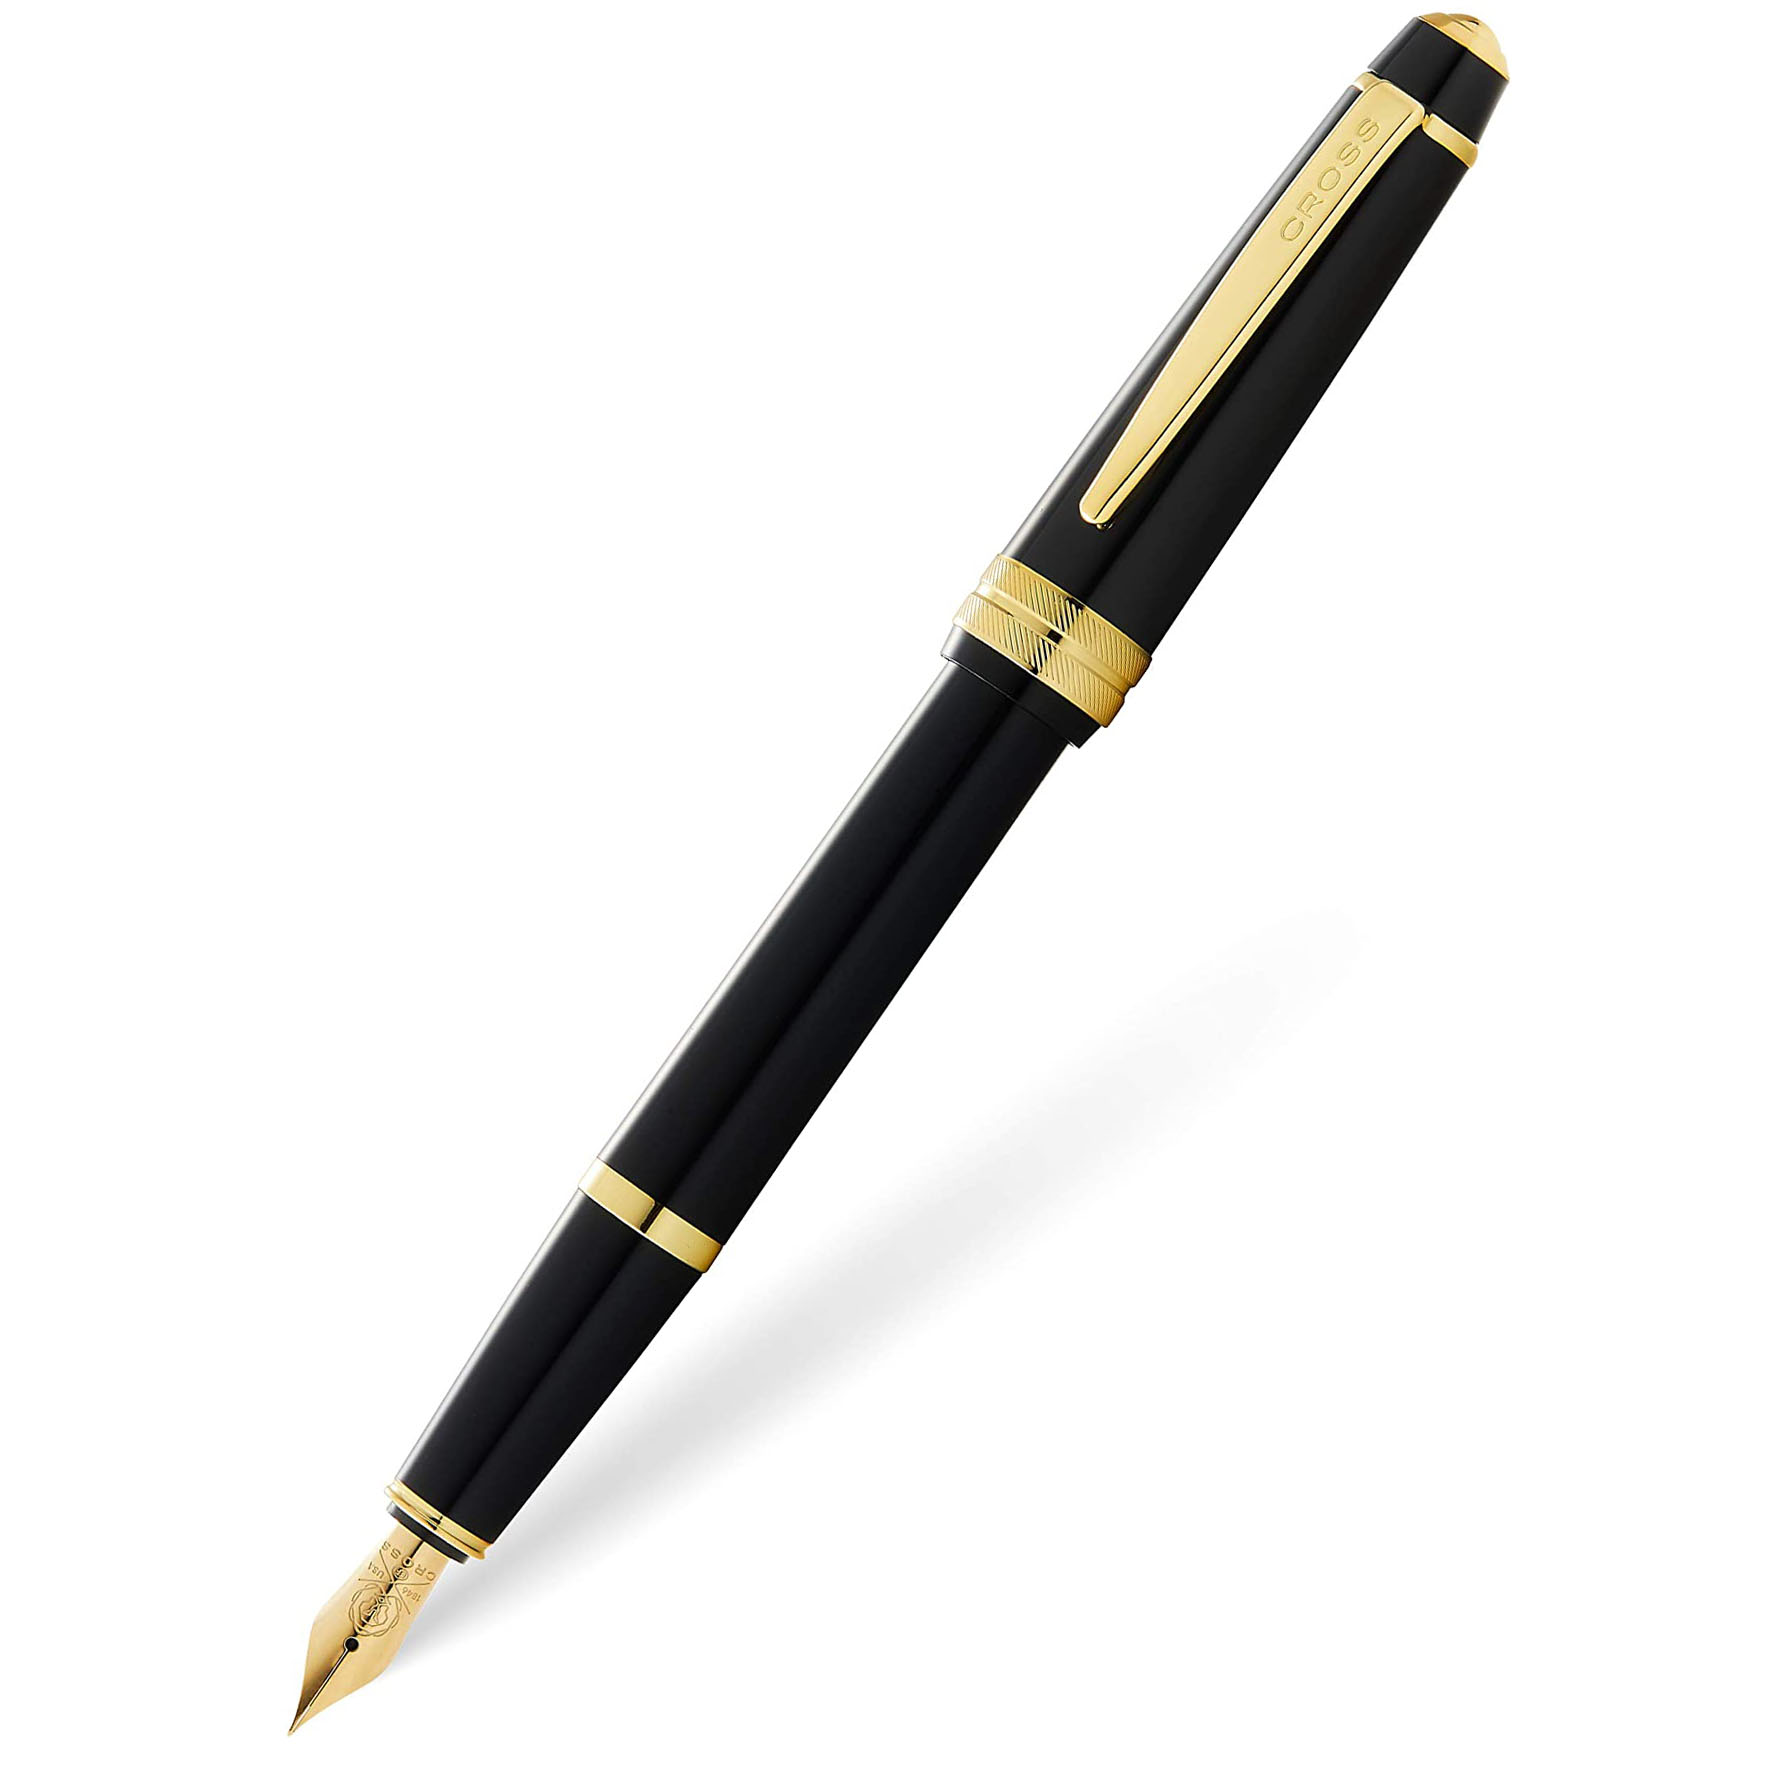 Bailey Light Polished Black Resin and Gold Tone Fountain Pen